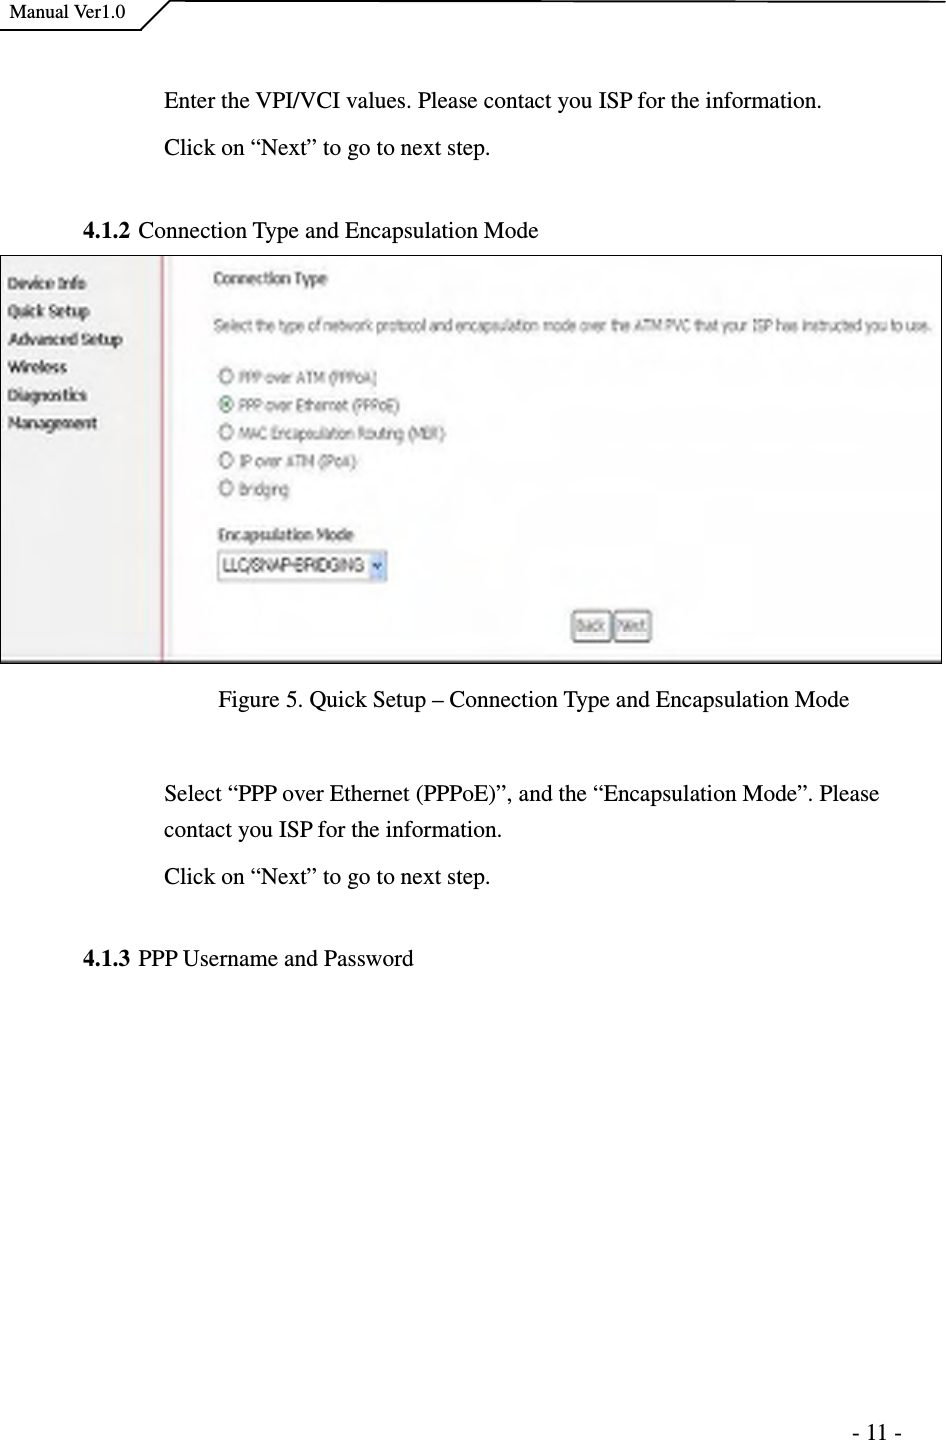    Manual Ver1.0                                                                      - 11 -  Enter the VPI/VCI values. Please contact you ISP for the information. Click on “Next” to go to next step.  4.1.2 Connection Type and Encapsulation Mode  Figure 5. Quick Setup – Connection Type and Encapsulation Mode  Select “PPP over Ethernet (PPPoE)”, and the “Encapsulation Mode”. Please contact you ISP for the information. Click on “Next” to go to next step.  4.1.3 PPP Username and Password 